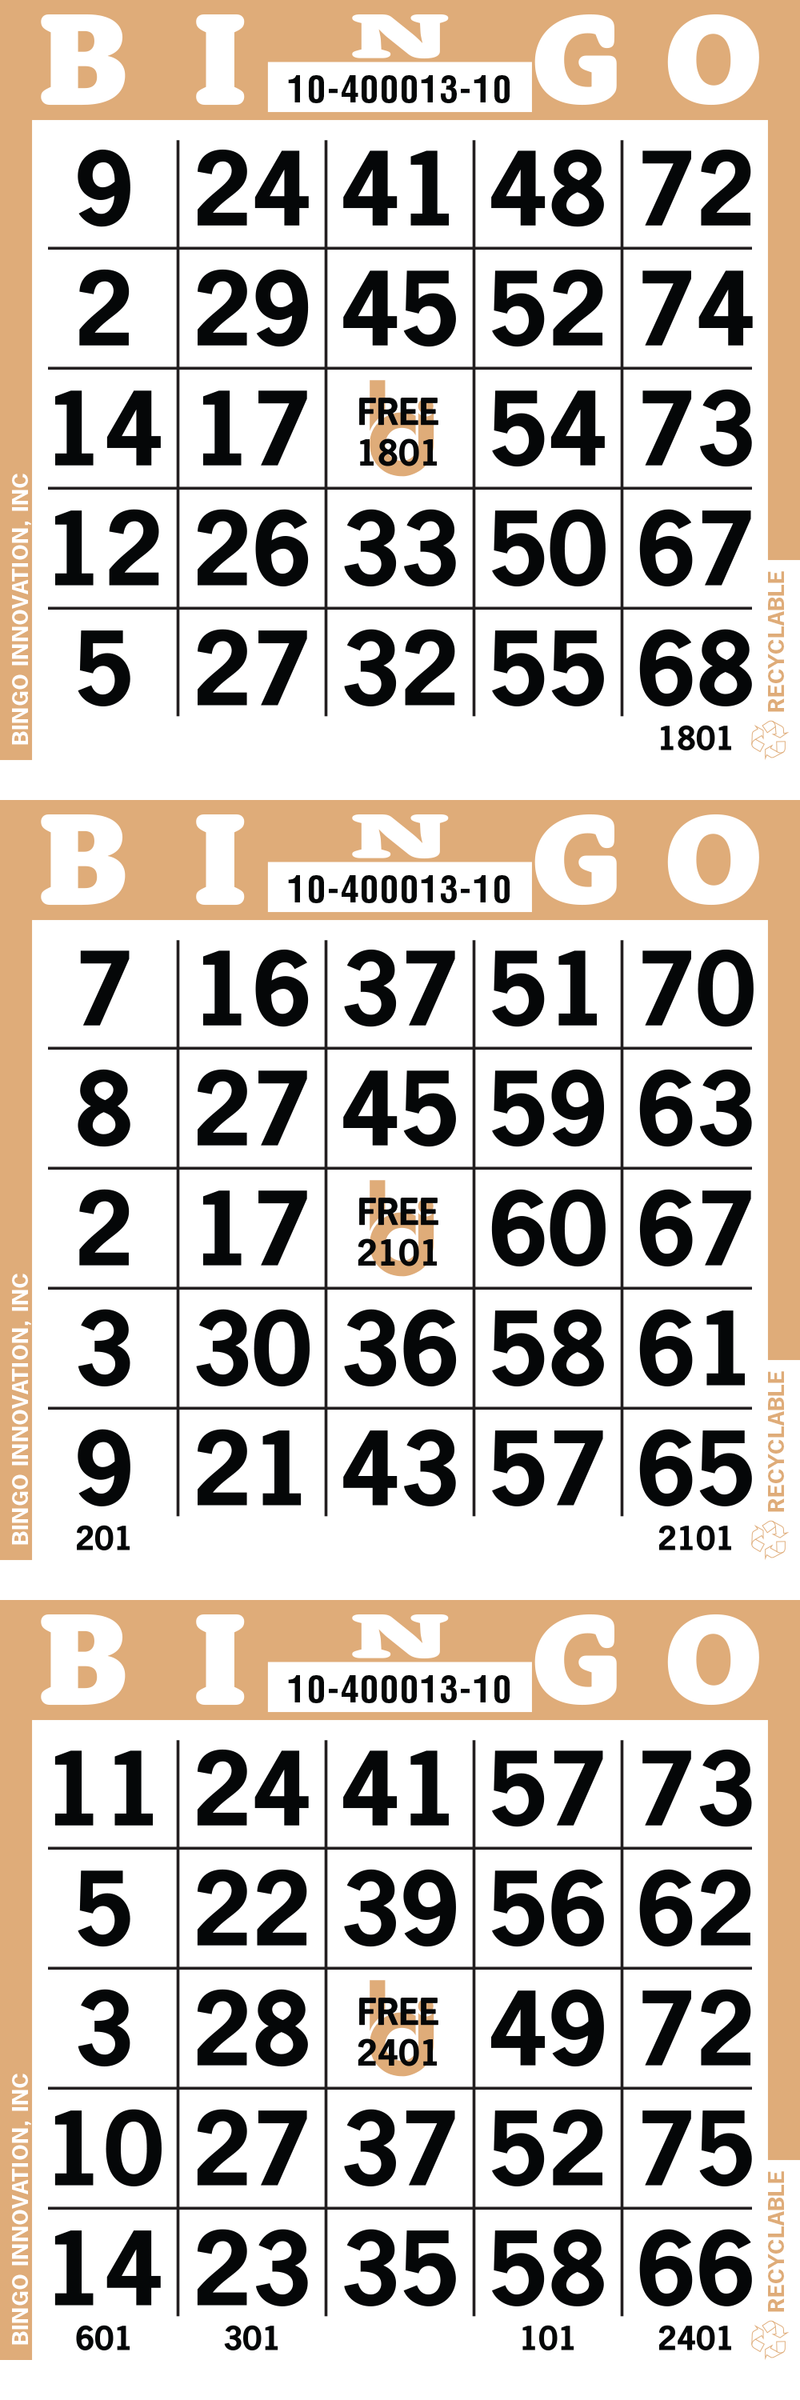 3on Bingo Paper By The Case 3,000 Sheets